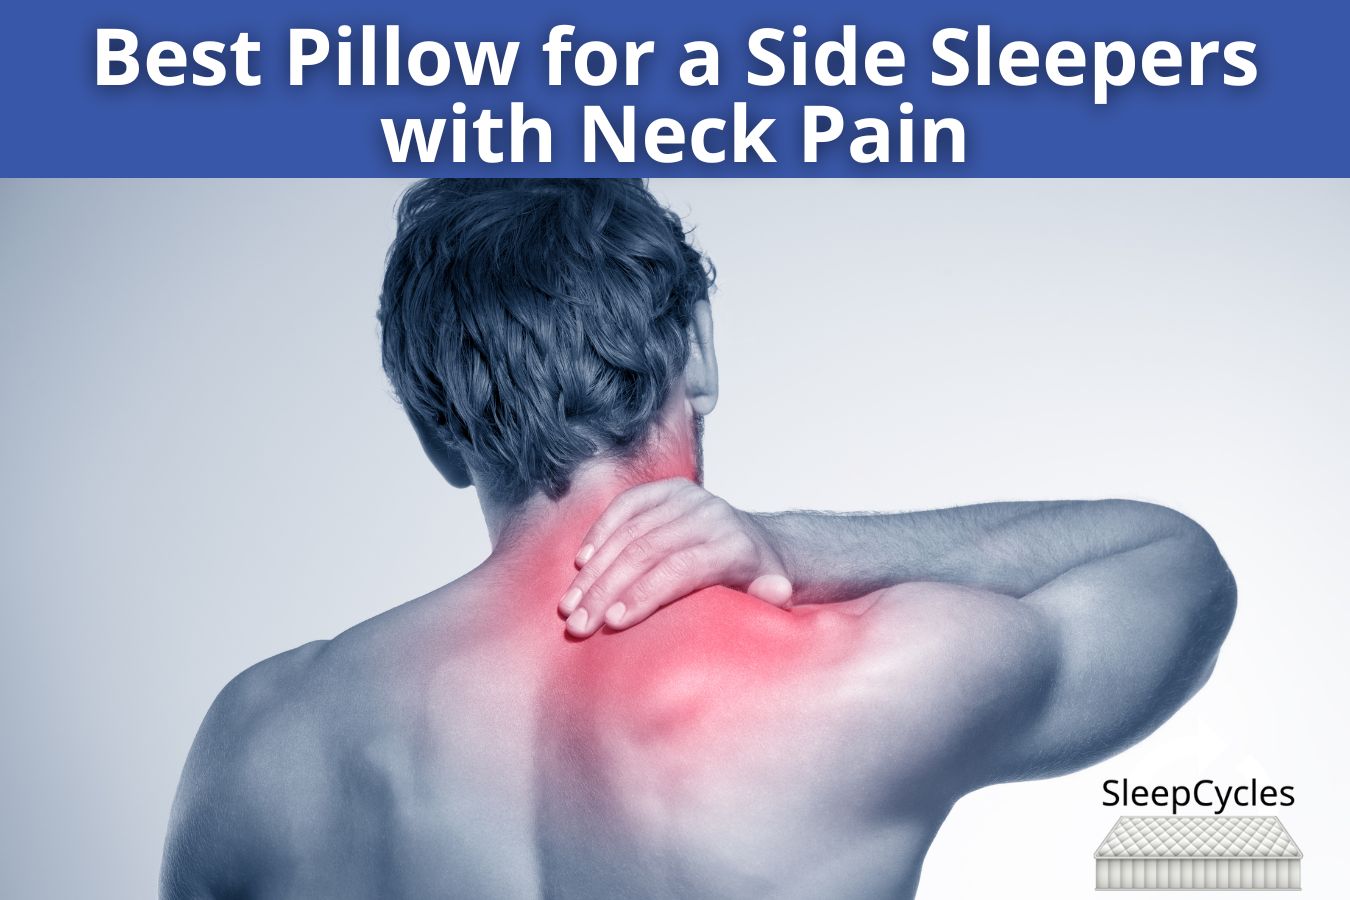 Best Pillow for a Side Sleepers with Neck Pain